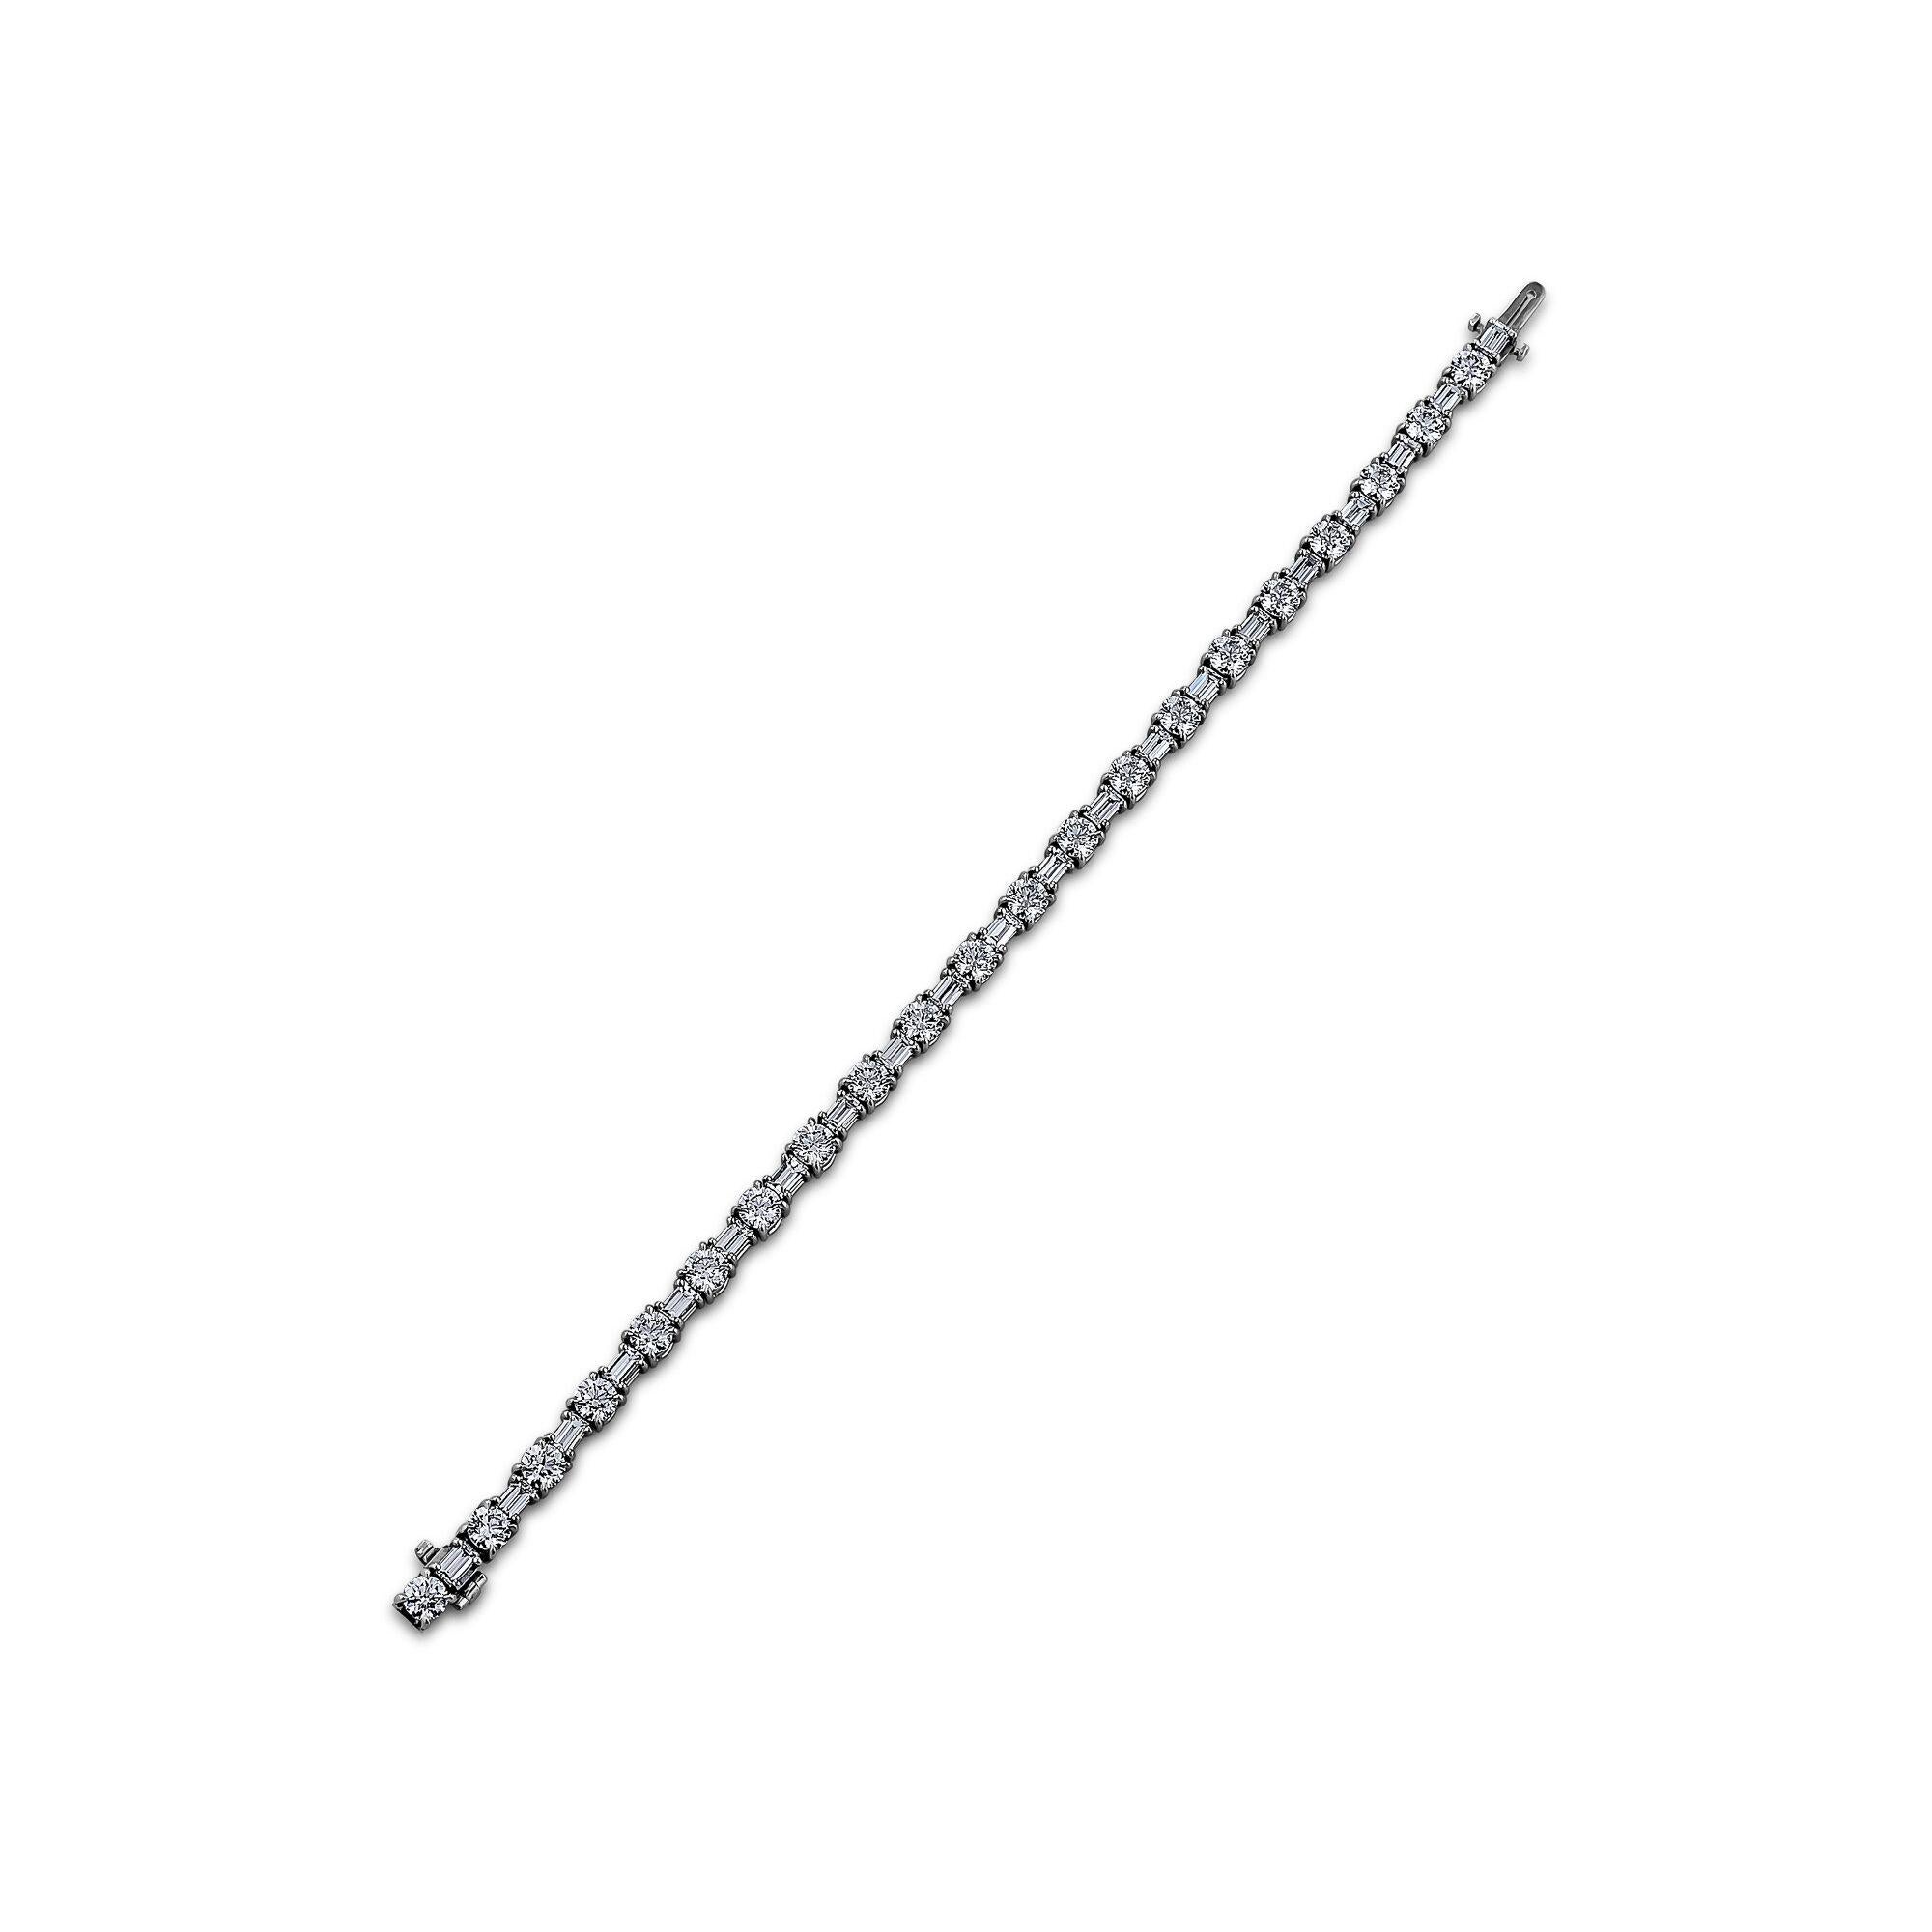 With a total of 7.88 carats of alternating round brilliant ideal cut diamonds, this elegant bracelet is the perfect line up.  Handmade by Steven Fox Jewelry and mounted in platinum, this classic line bracelet will give you the sparkle, sizzle, and